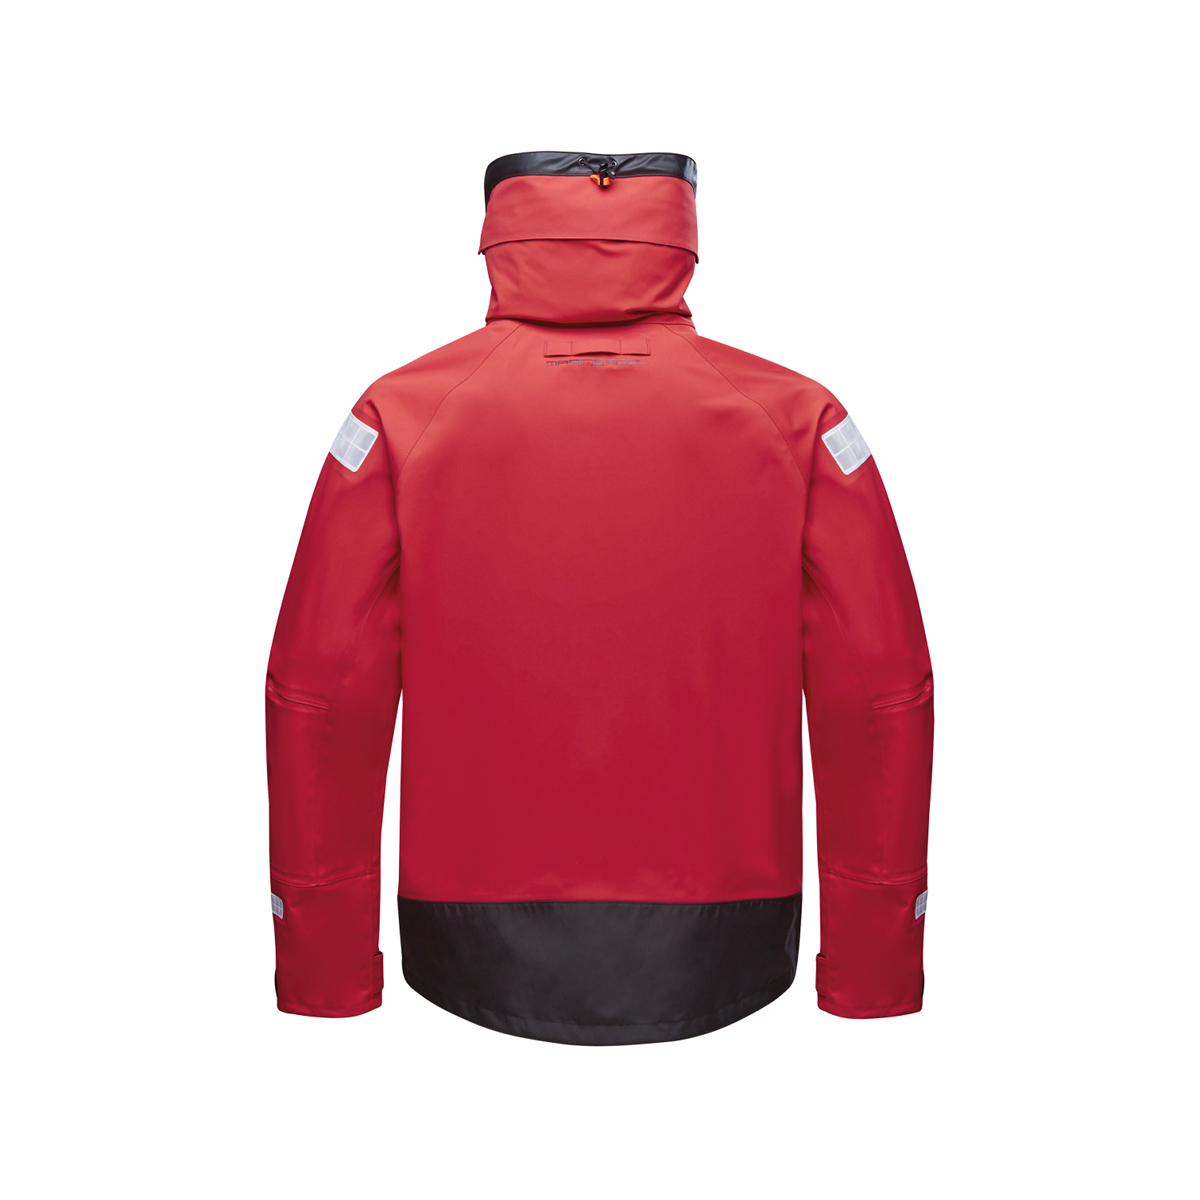 Marinepool Fortuna 2.0 veste de voile Offshore homme rouge, taille XXL